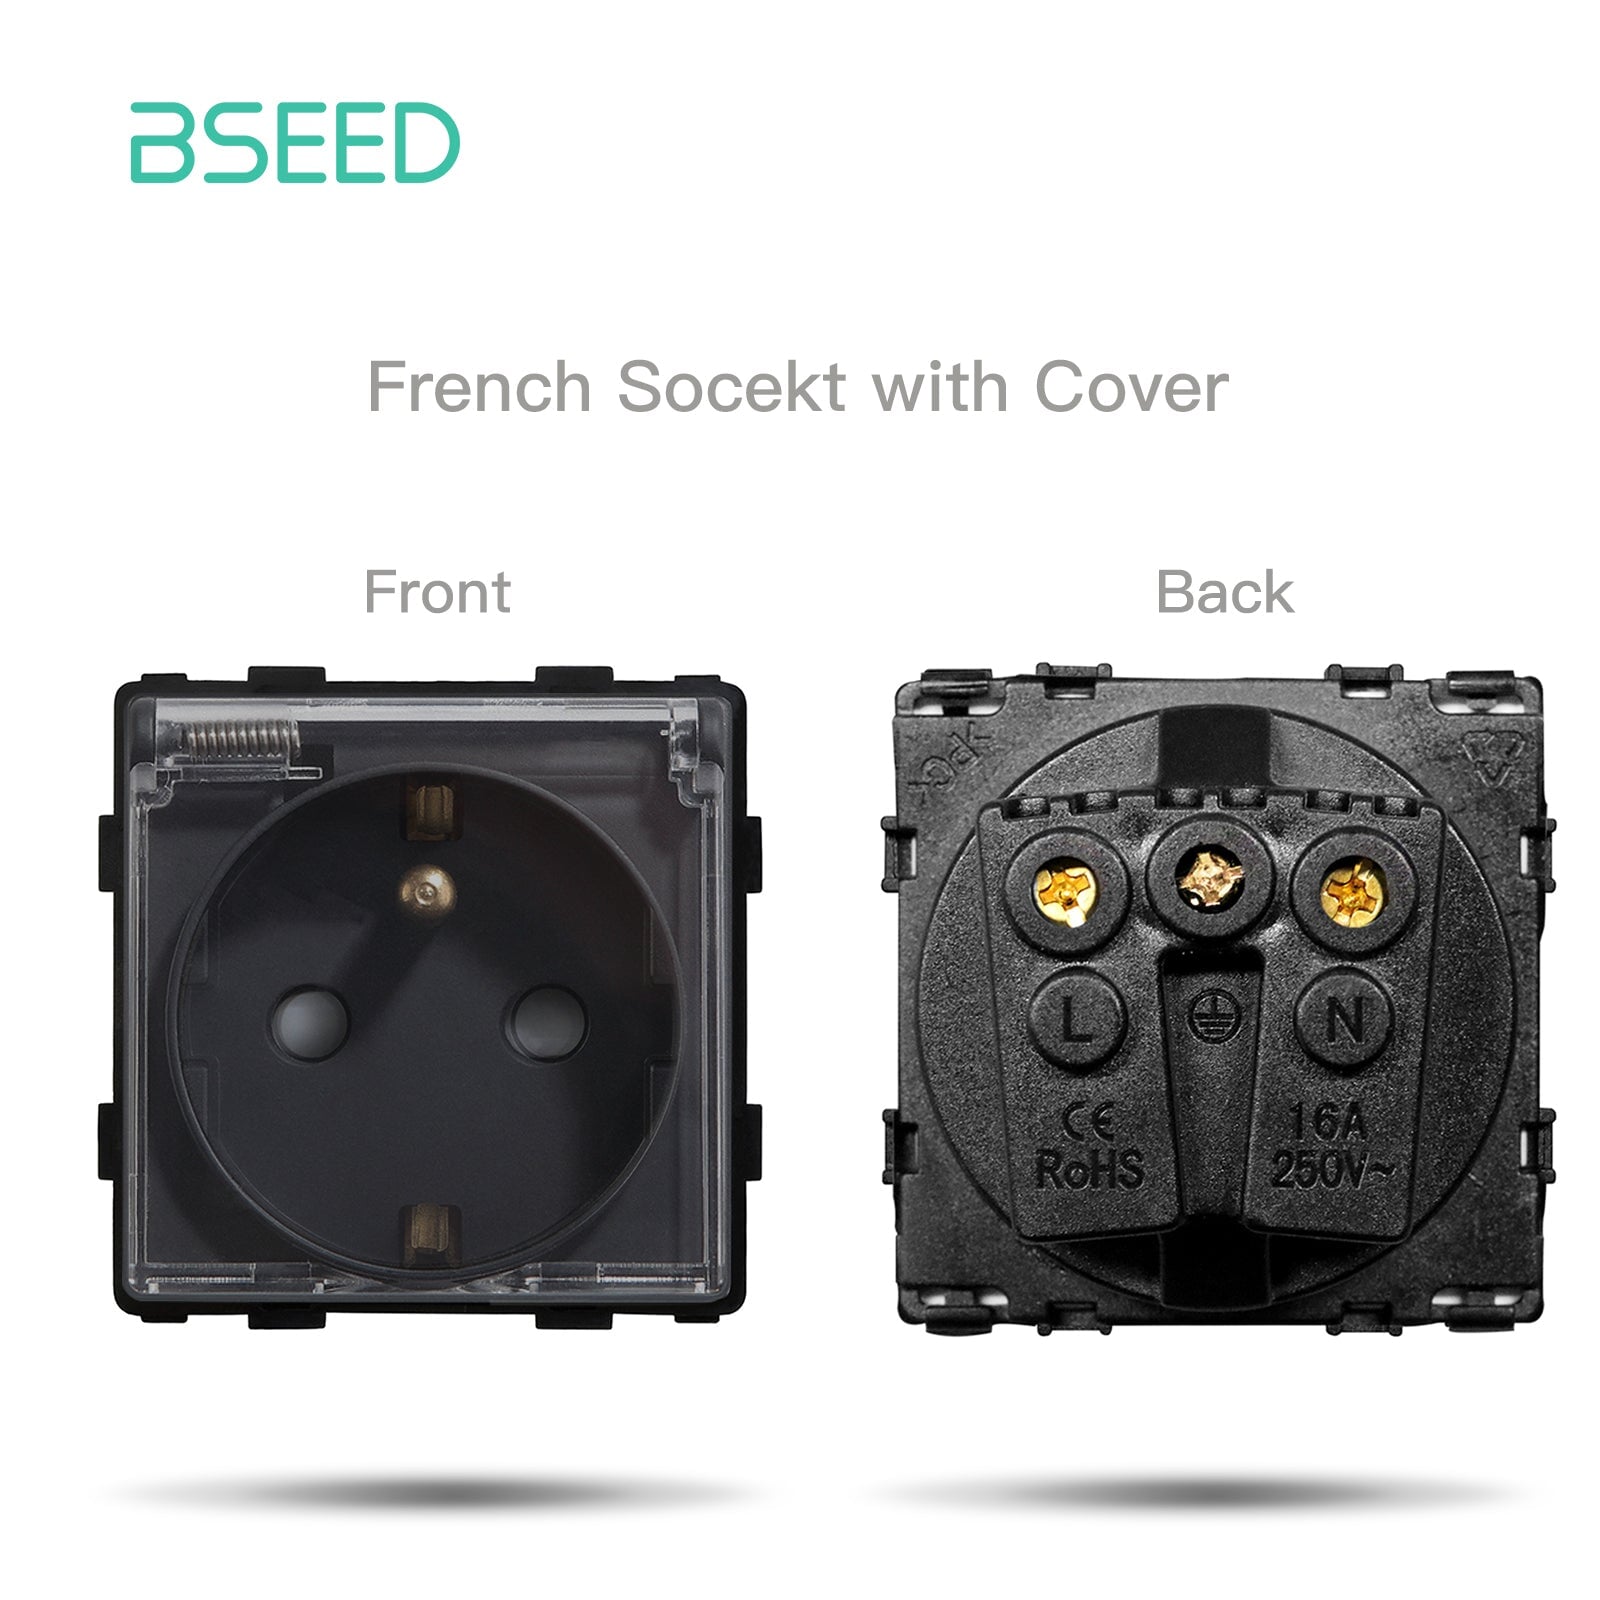 BSEED EU/FR standard Function Key Cover Socket DIY Parts Power Outlets & Sockets Bseedswitch BLACK FR 